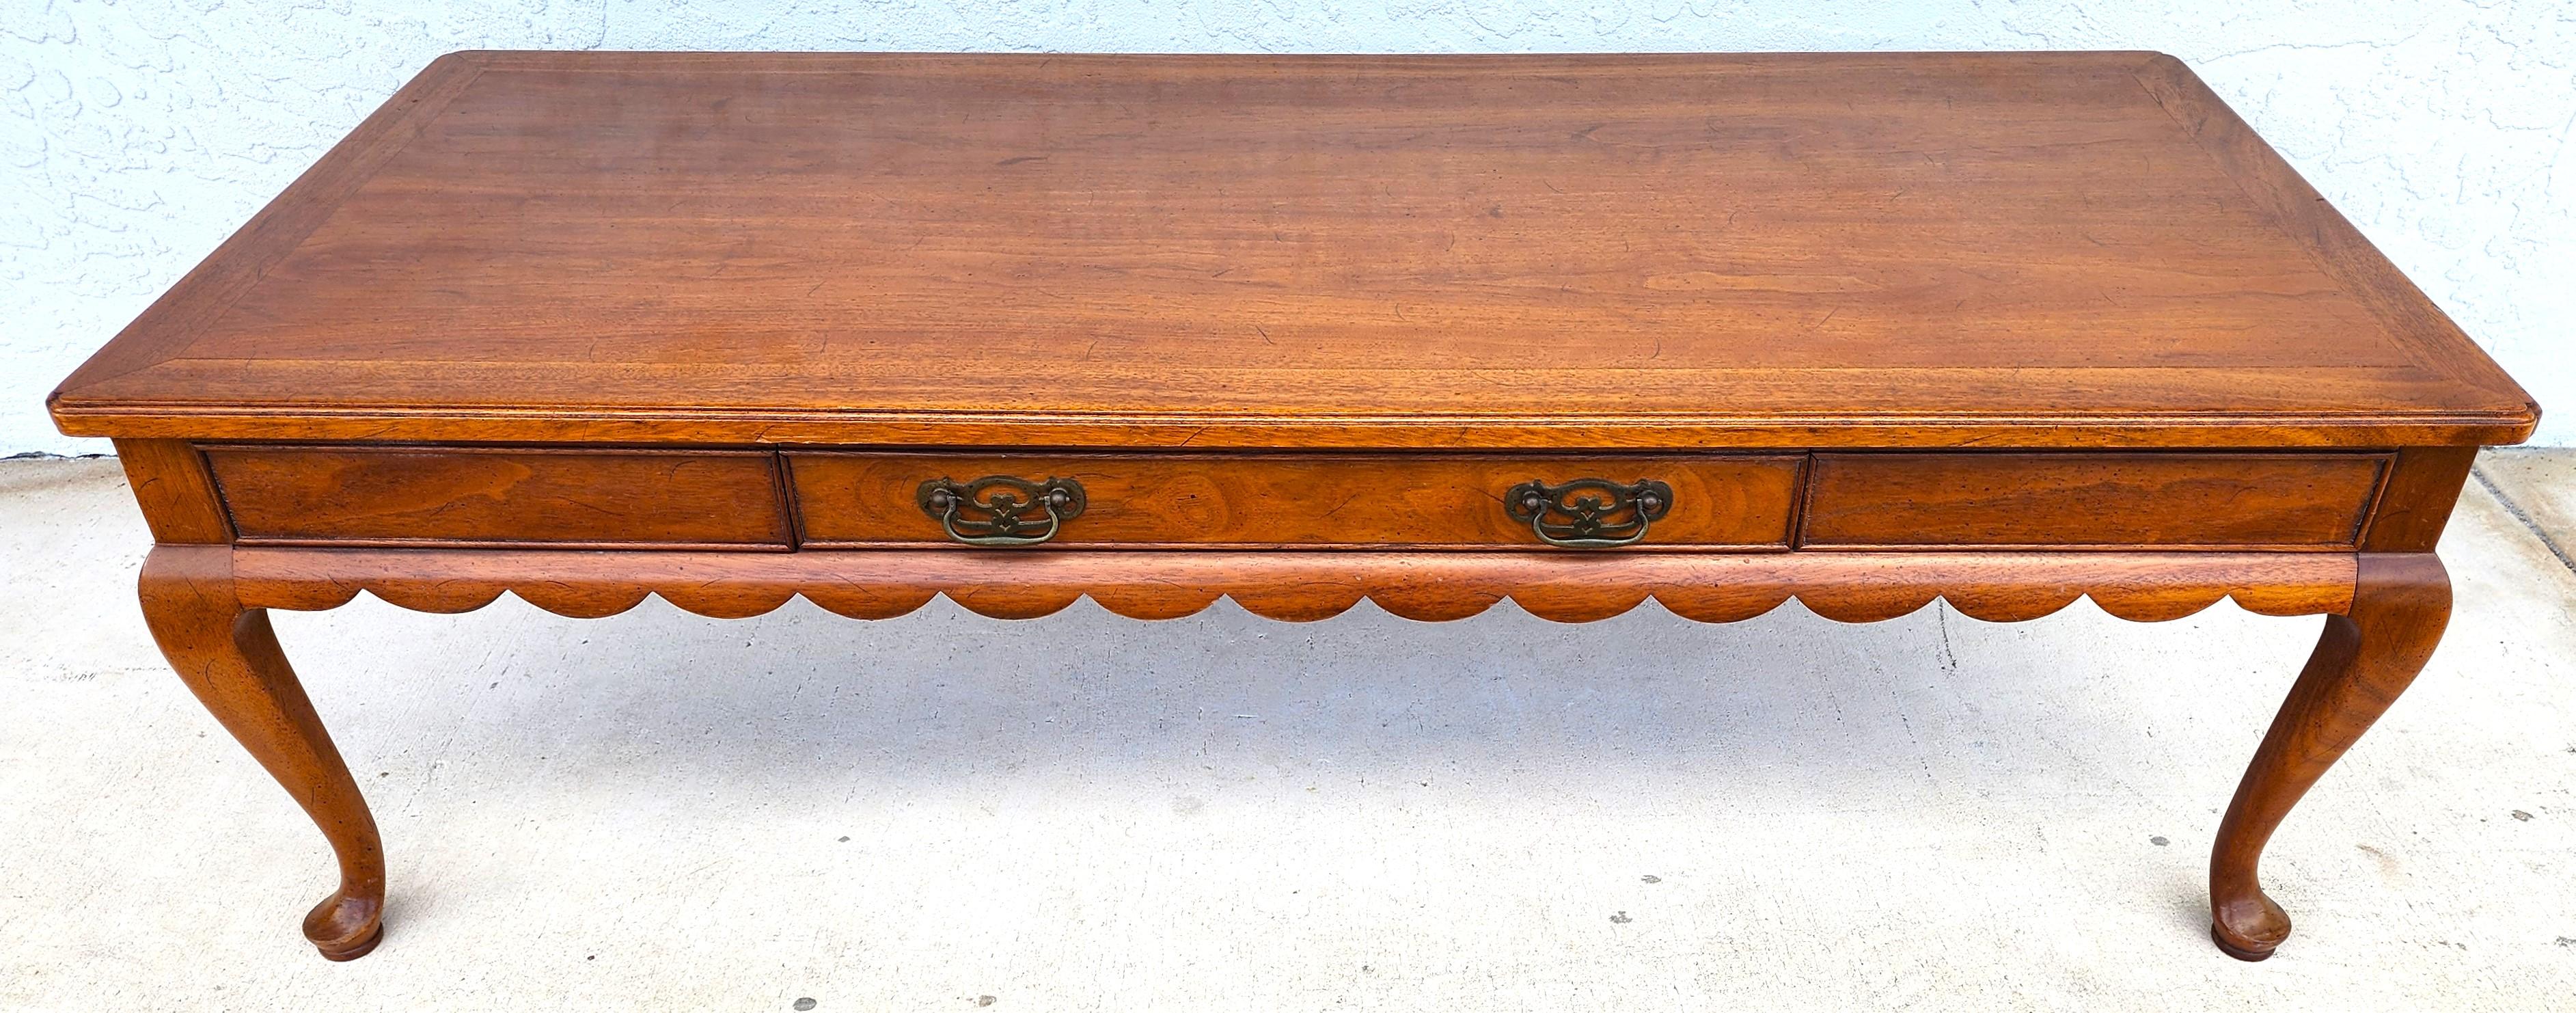 French Country Coffee Table by Henredon In Good Condition For Sale In Lake Worth, FL